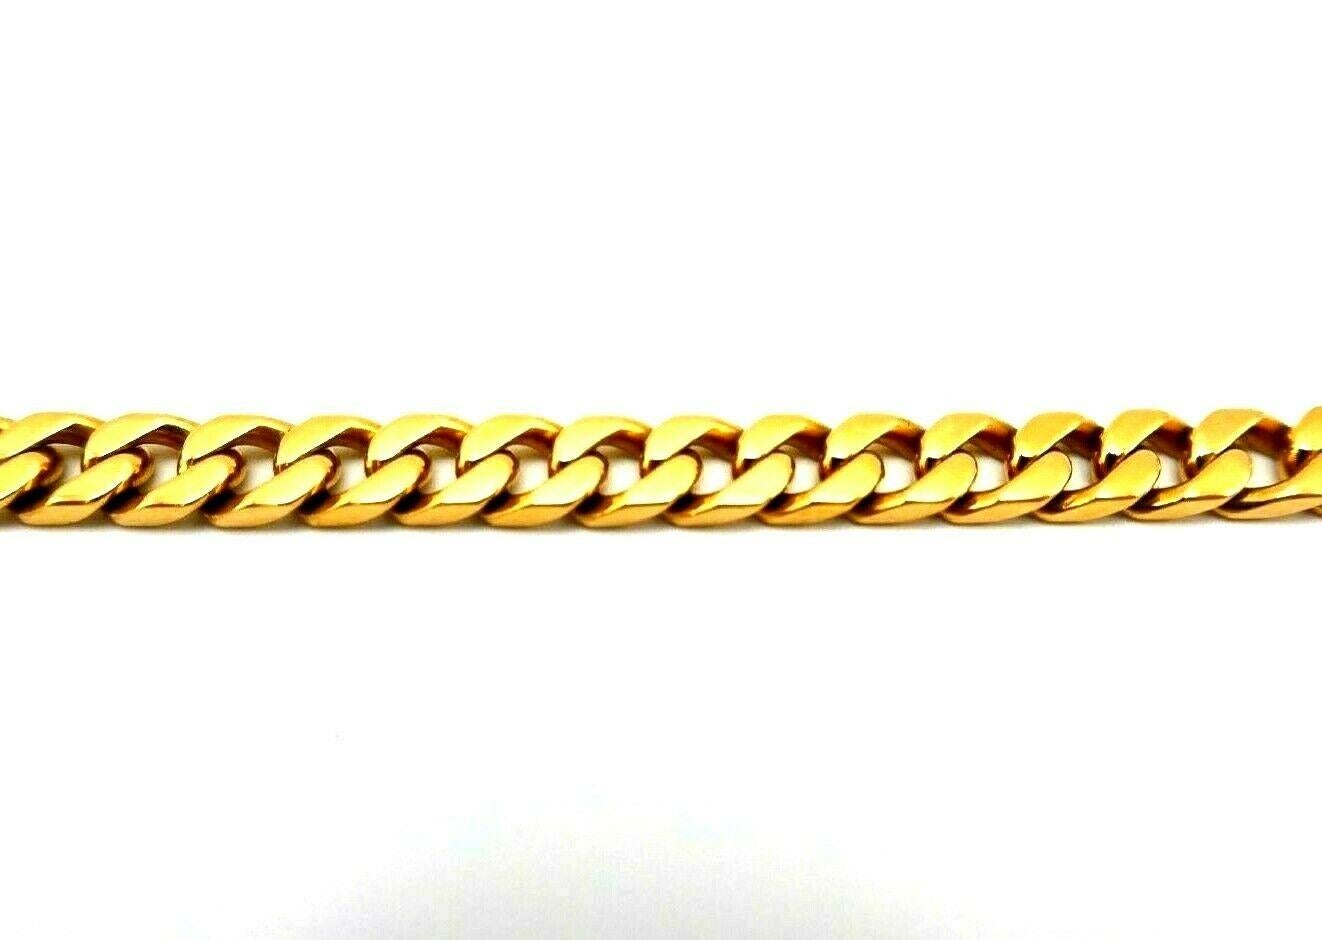 Vintage 18k rose gold cuban link chain bracelet by Boucheron Paris. Stamped with the Boucheron maker's mark, a hallmark for 18k gold and a serial number. 
Measurements: 8